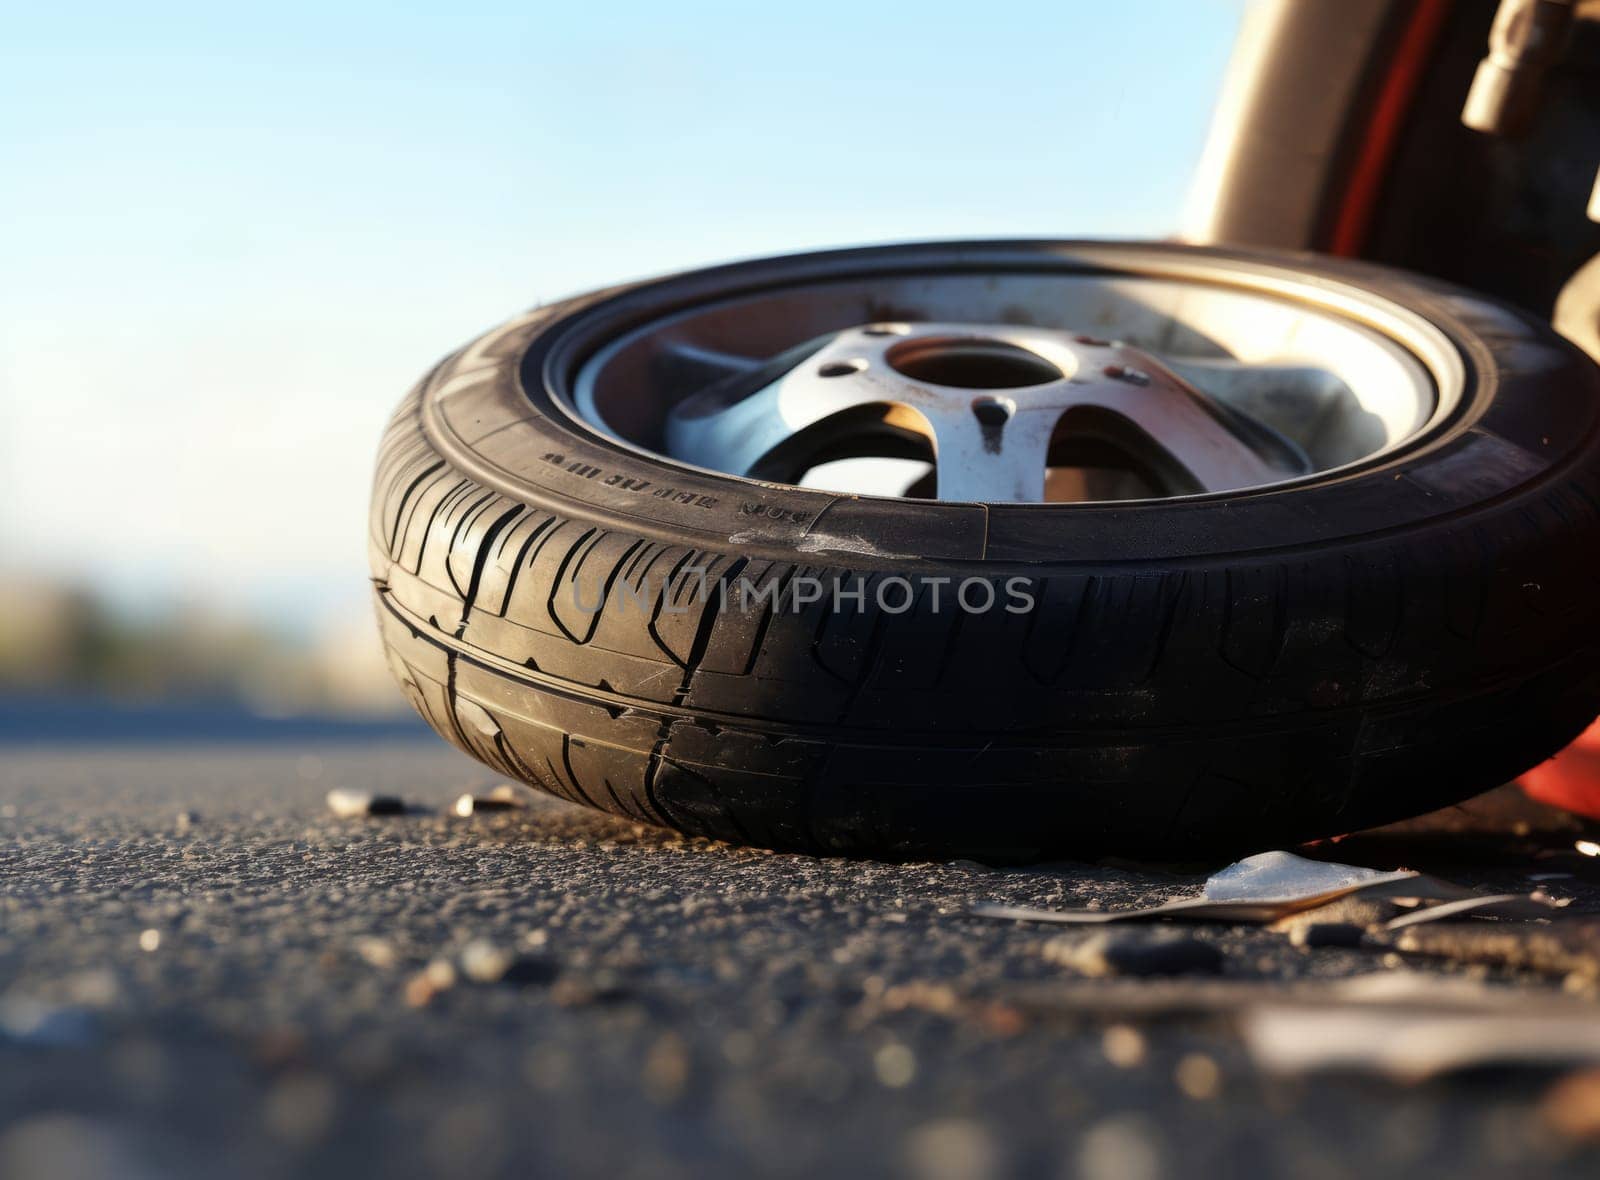 The damaged tire for motorcycle or scooter lies on the sidewalk after an accident while road trip. Fallen off wheel and two-wheeler wreckage lies on asphalt - severe crash close-up